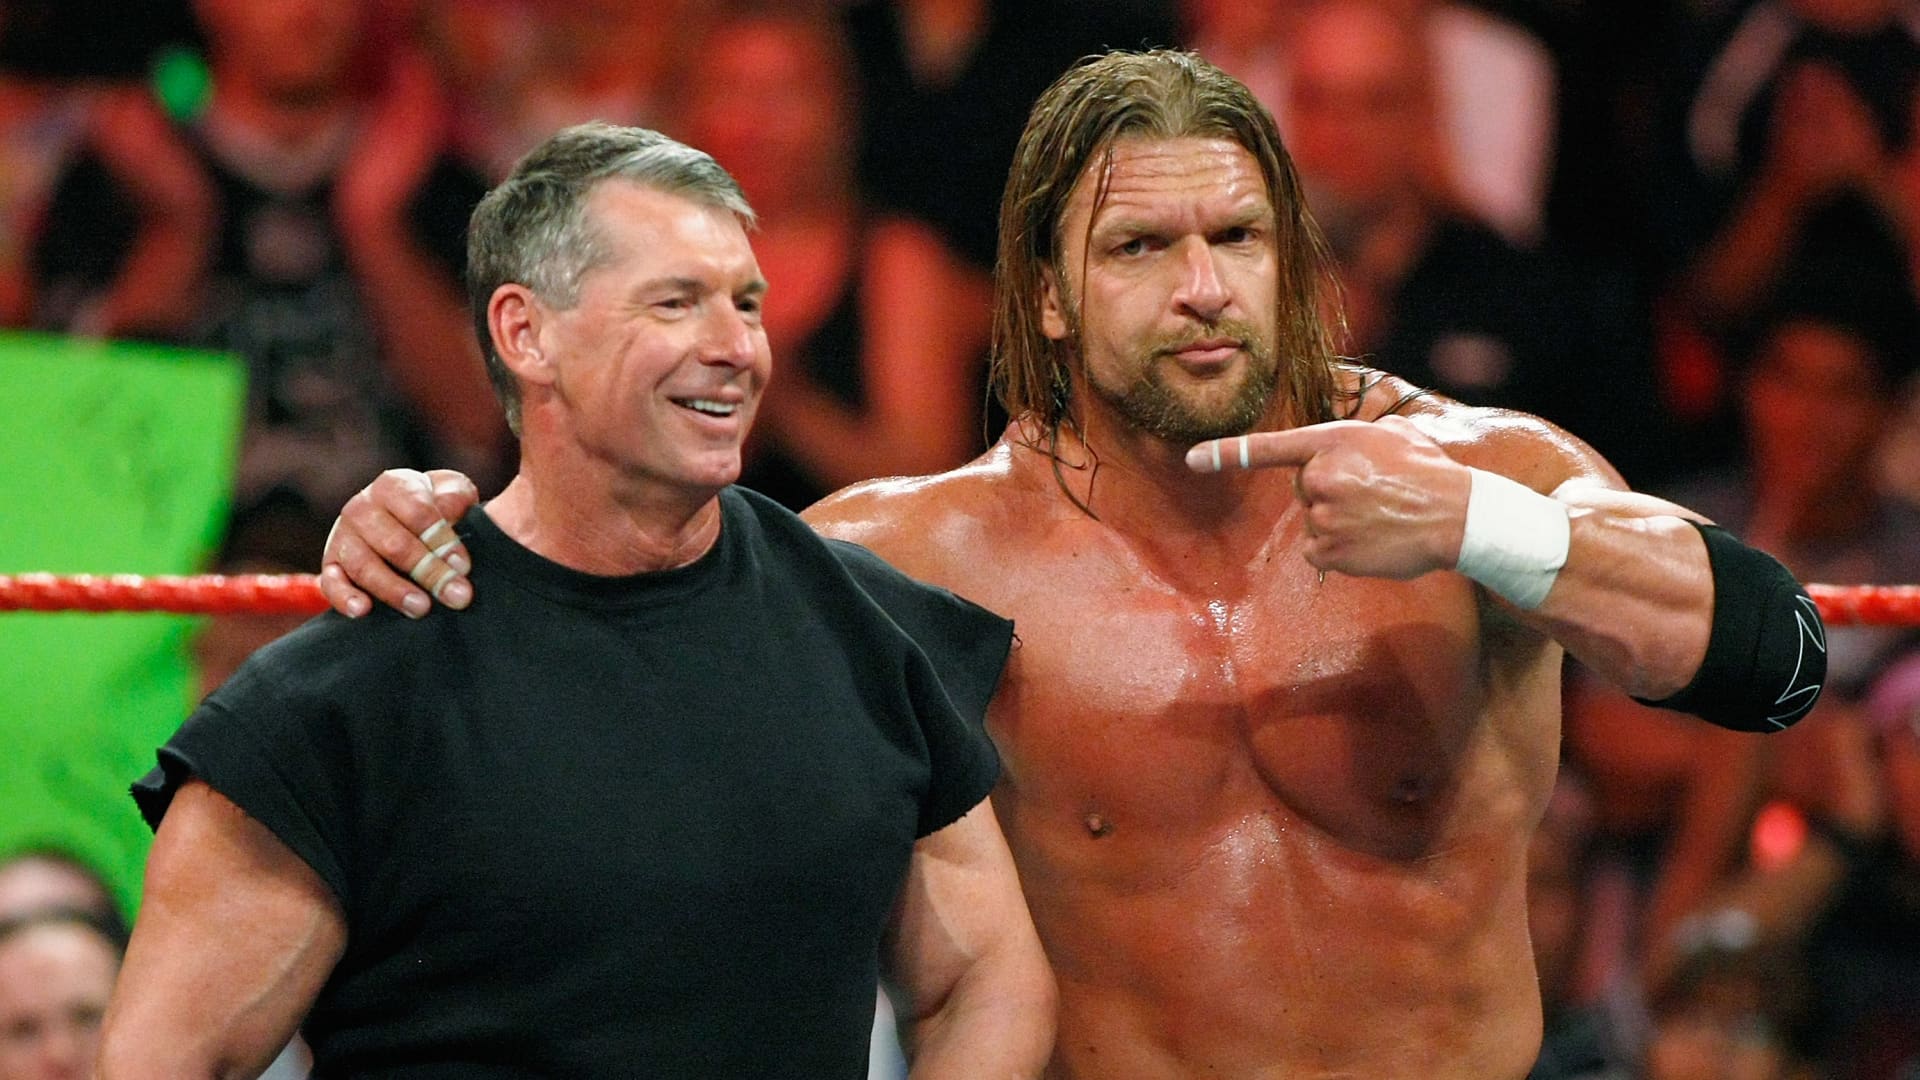 WWE at crossroads as Vince McMahon’s retirement and scandals heighten sale speculation